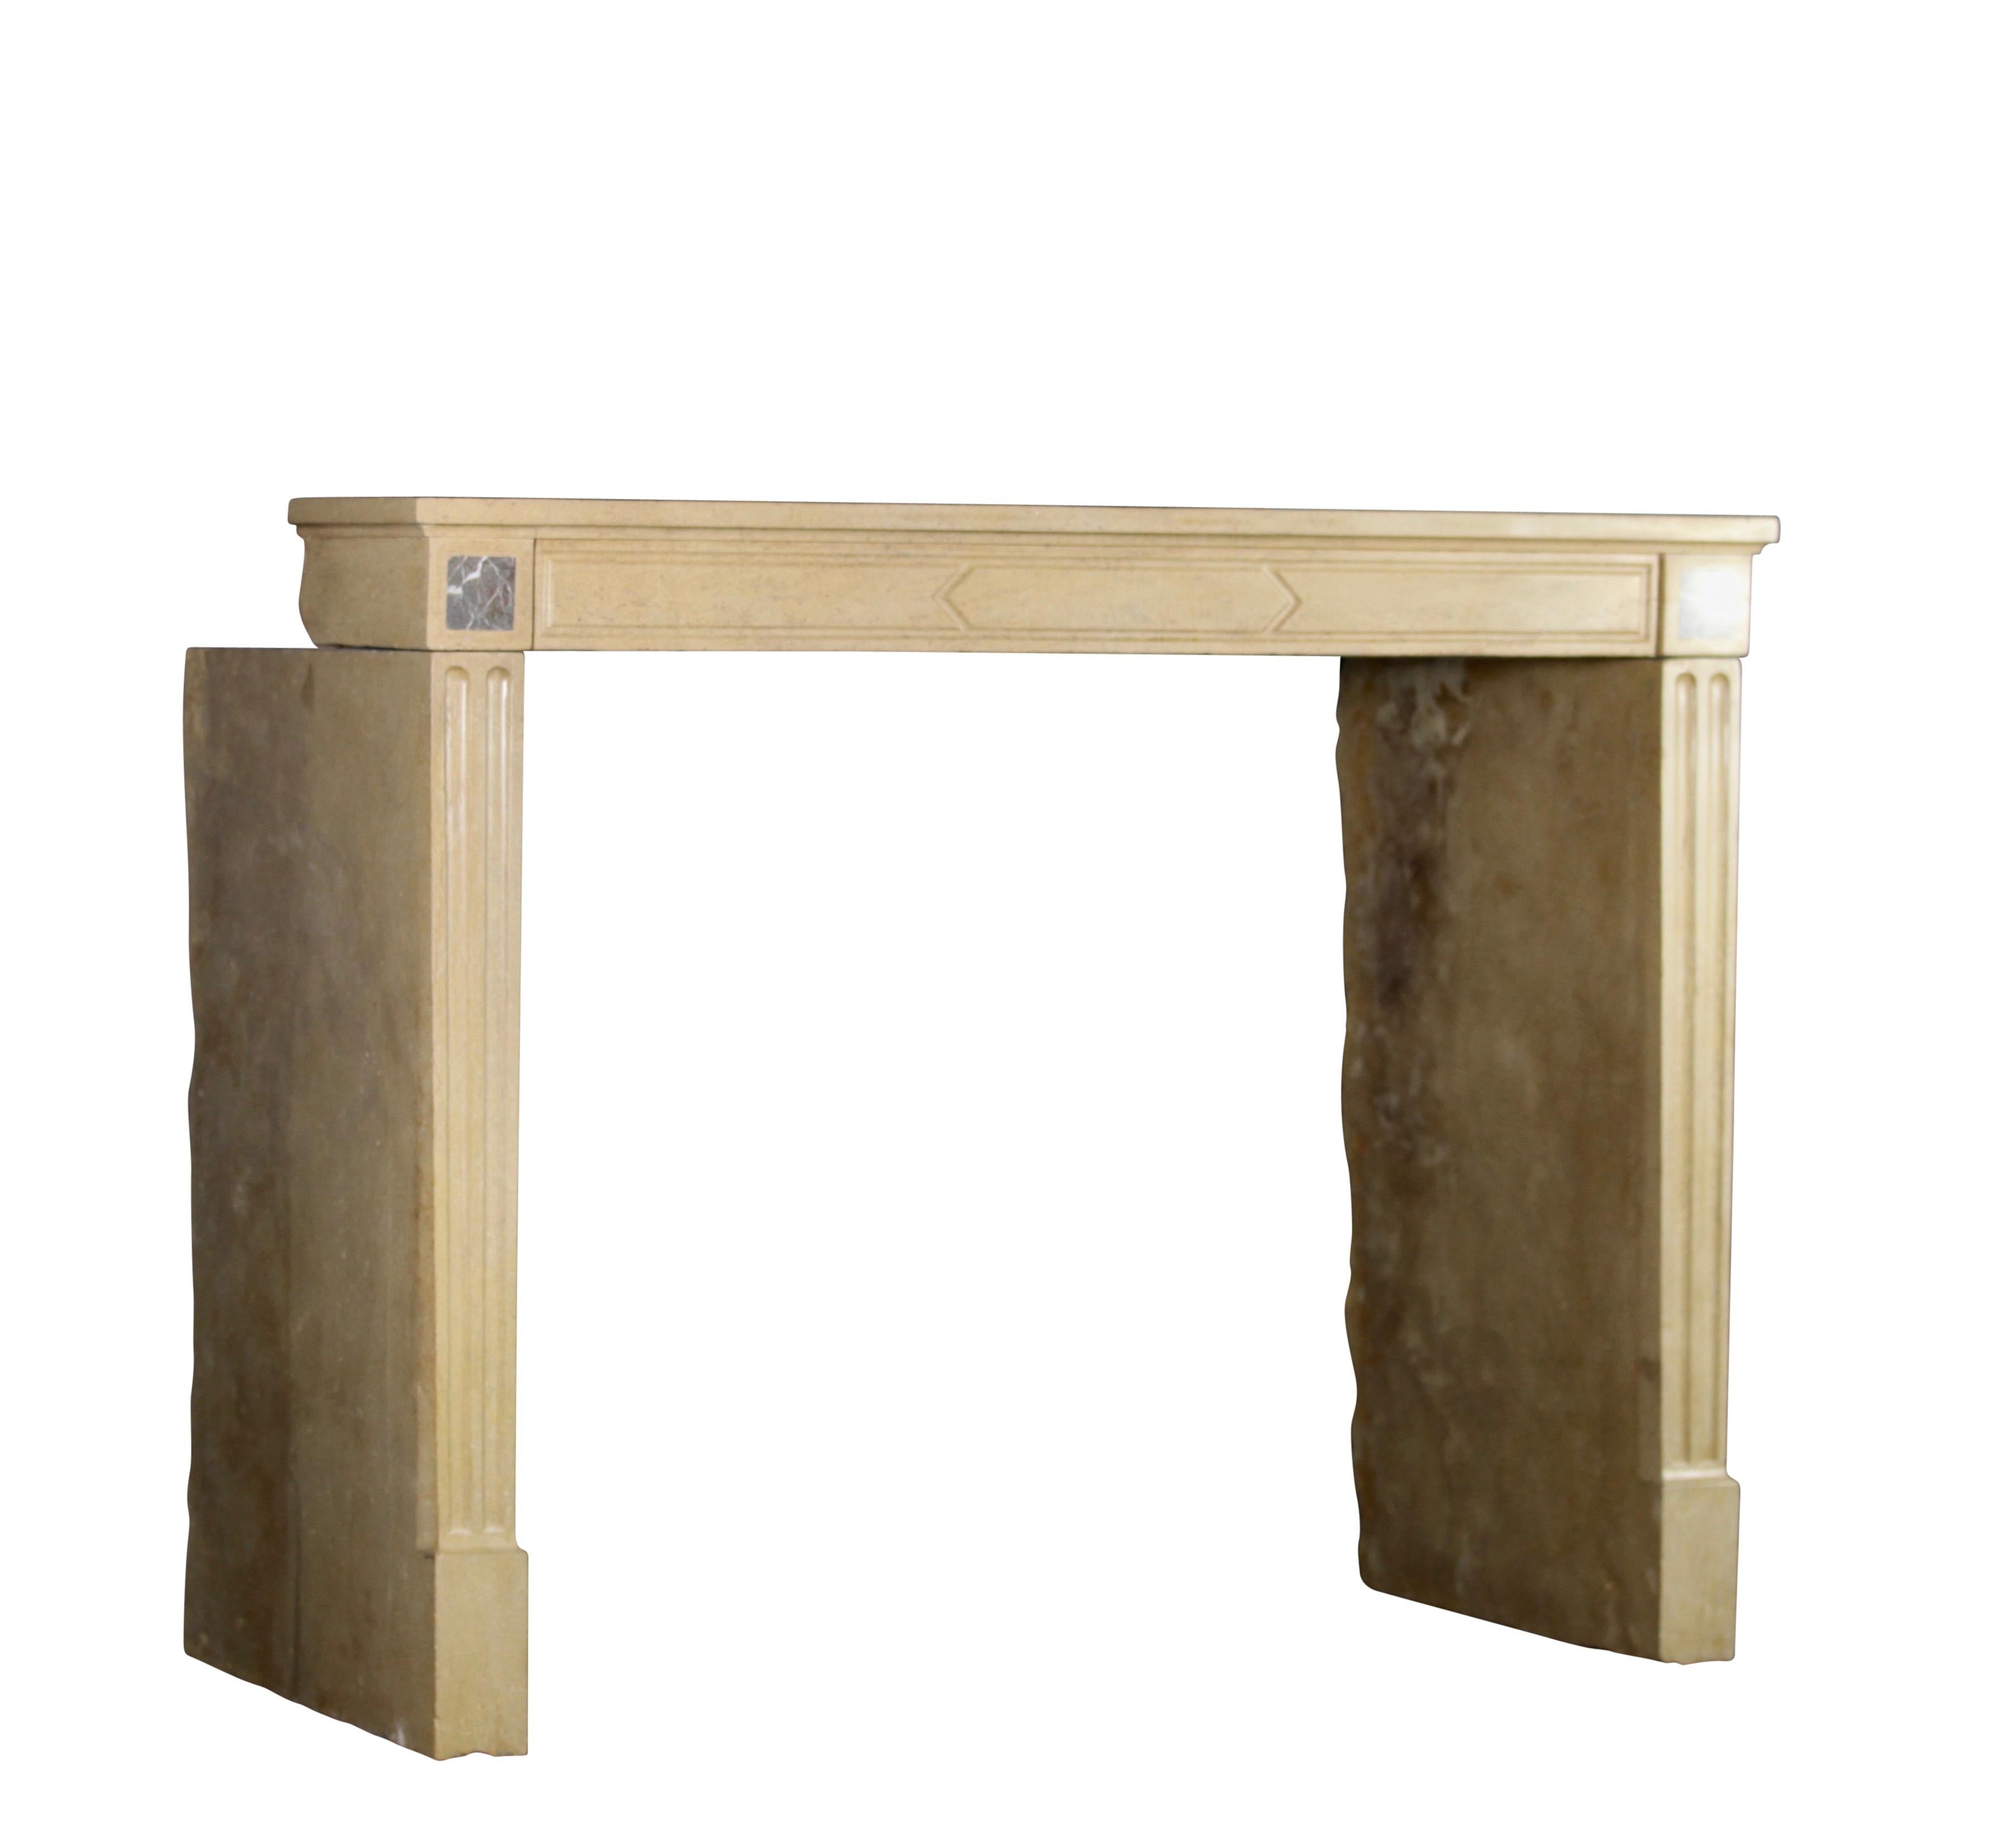 Fine French classic and small vintage decorative fireplace surround in hard stone with Grey St-Anna marble inlay. The grey marble inlay gives it an extra timeless luxury touch. A great element in a great condition.
Measures:
121,5 cm exterior